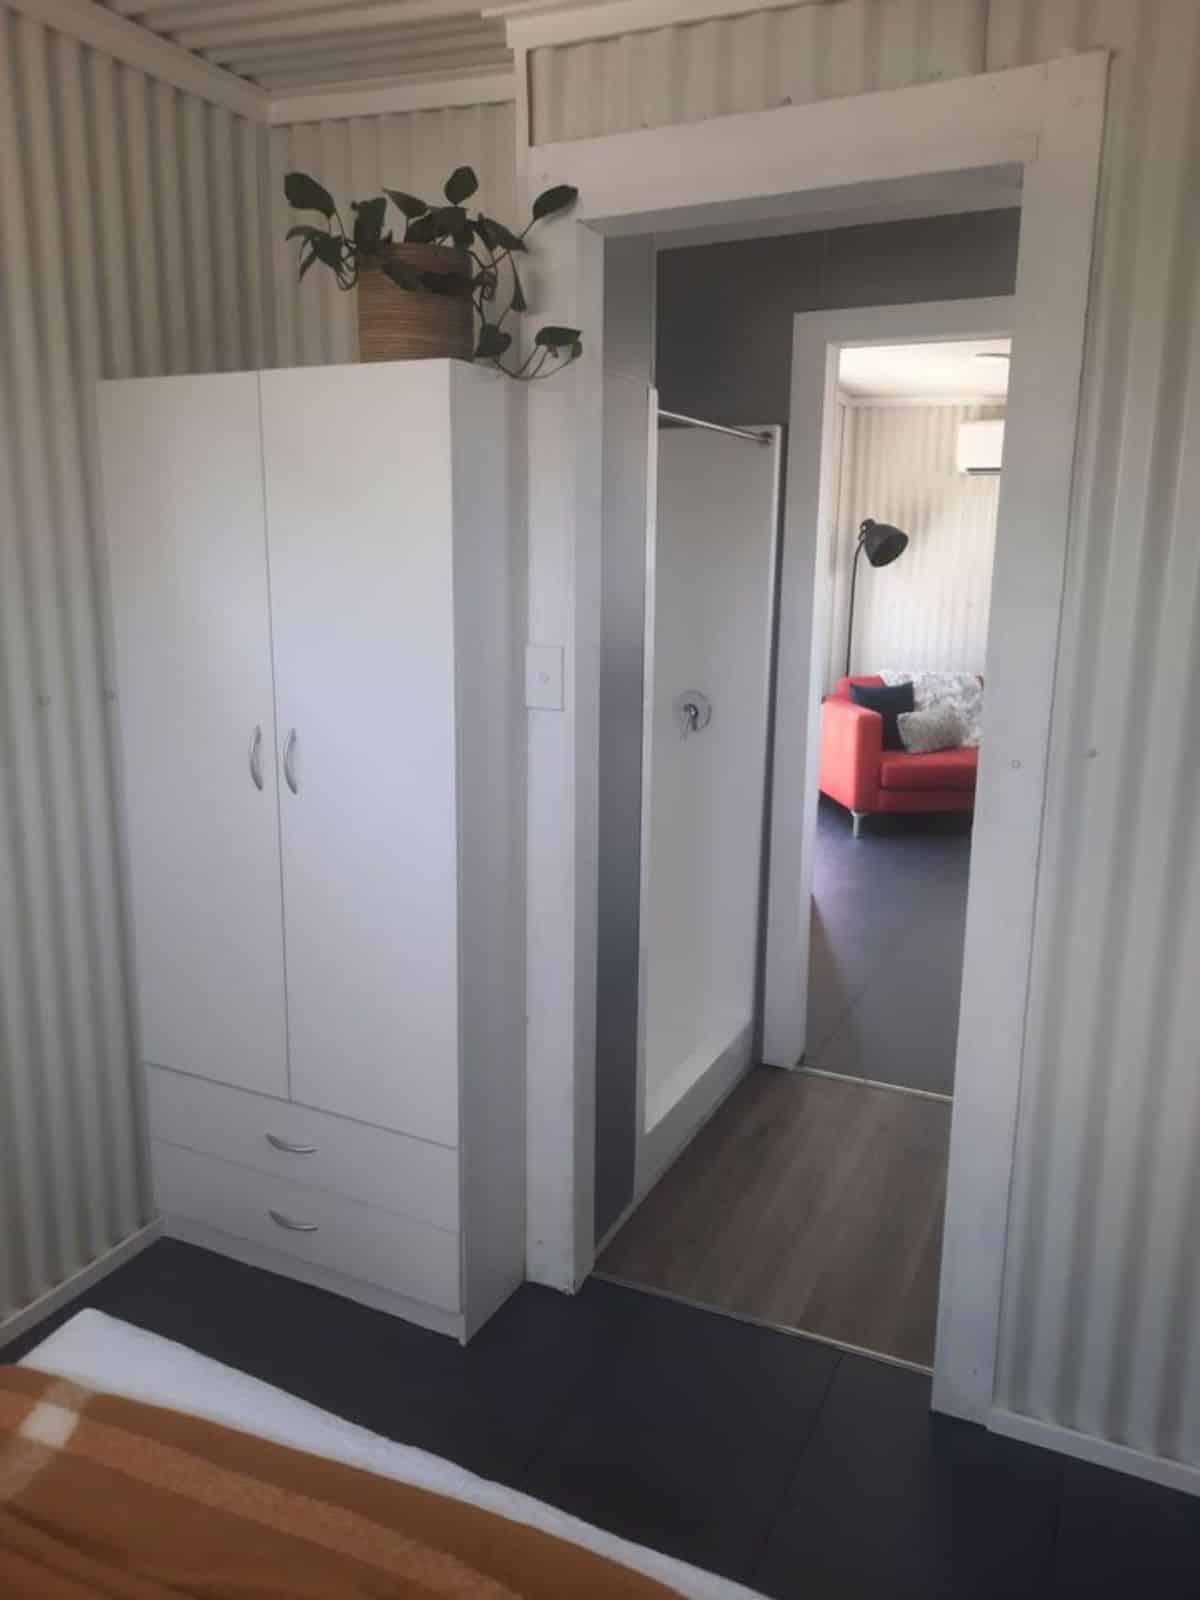 Wardrobe and shower area at the door of the bedroom